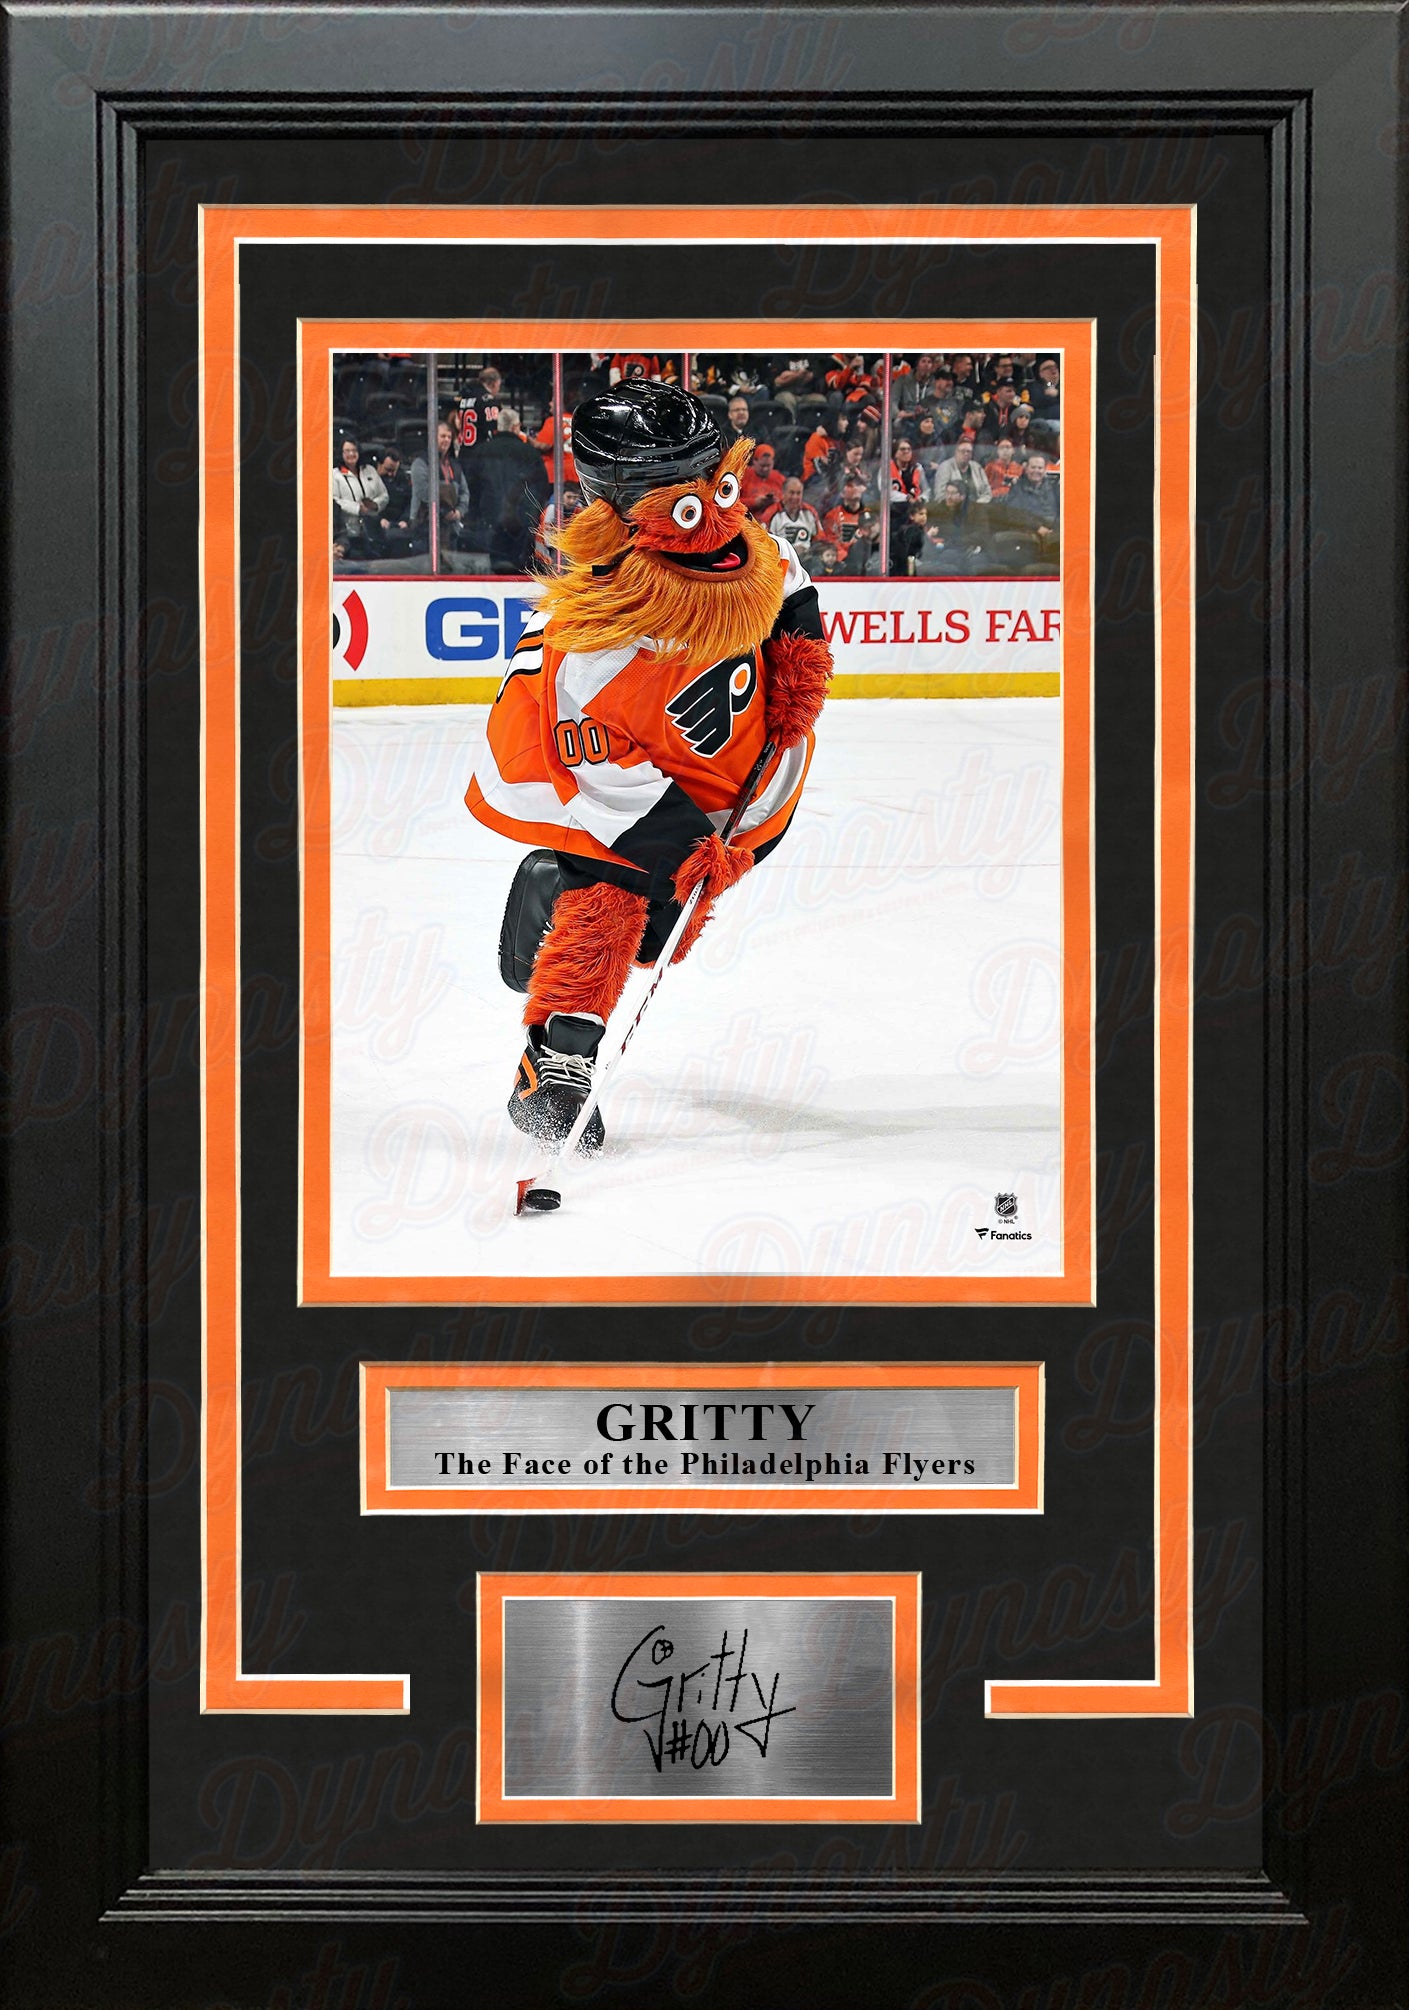 Philadelphia Flyers: Gritty Mascot - NHL Removable Wall Decal Giant Mascot + 2 Team Wall Decals